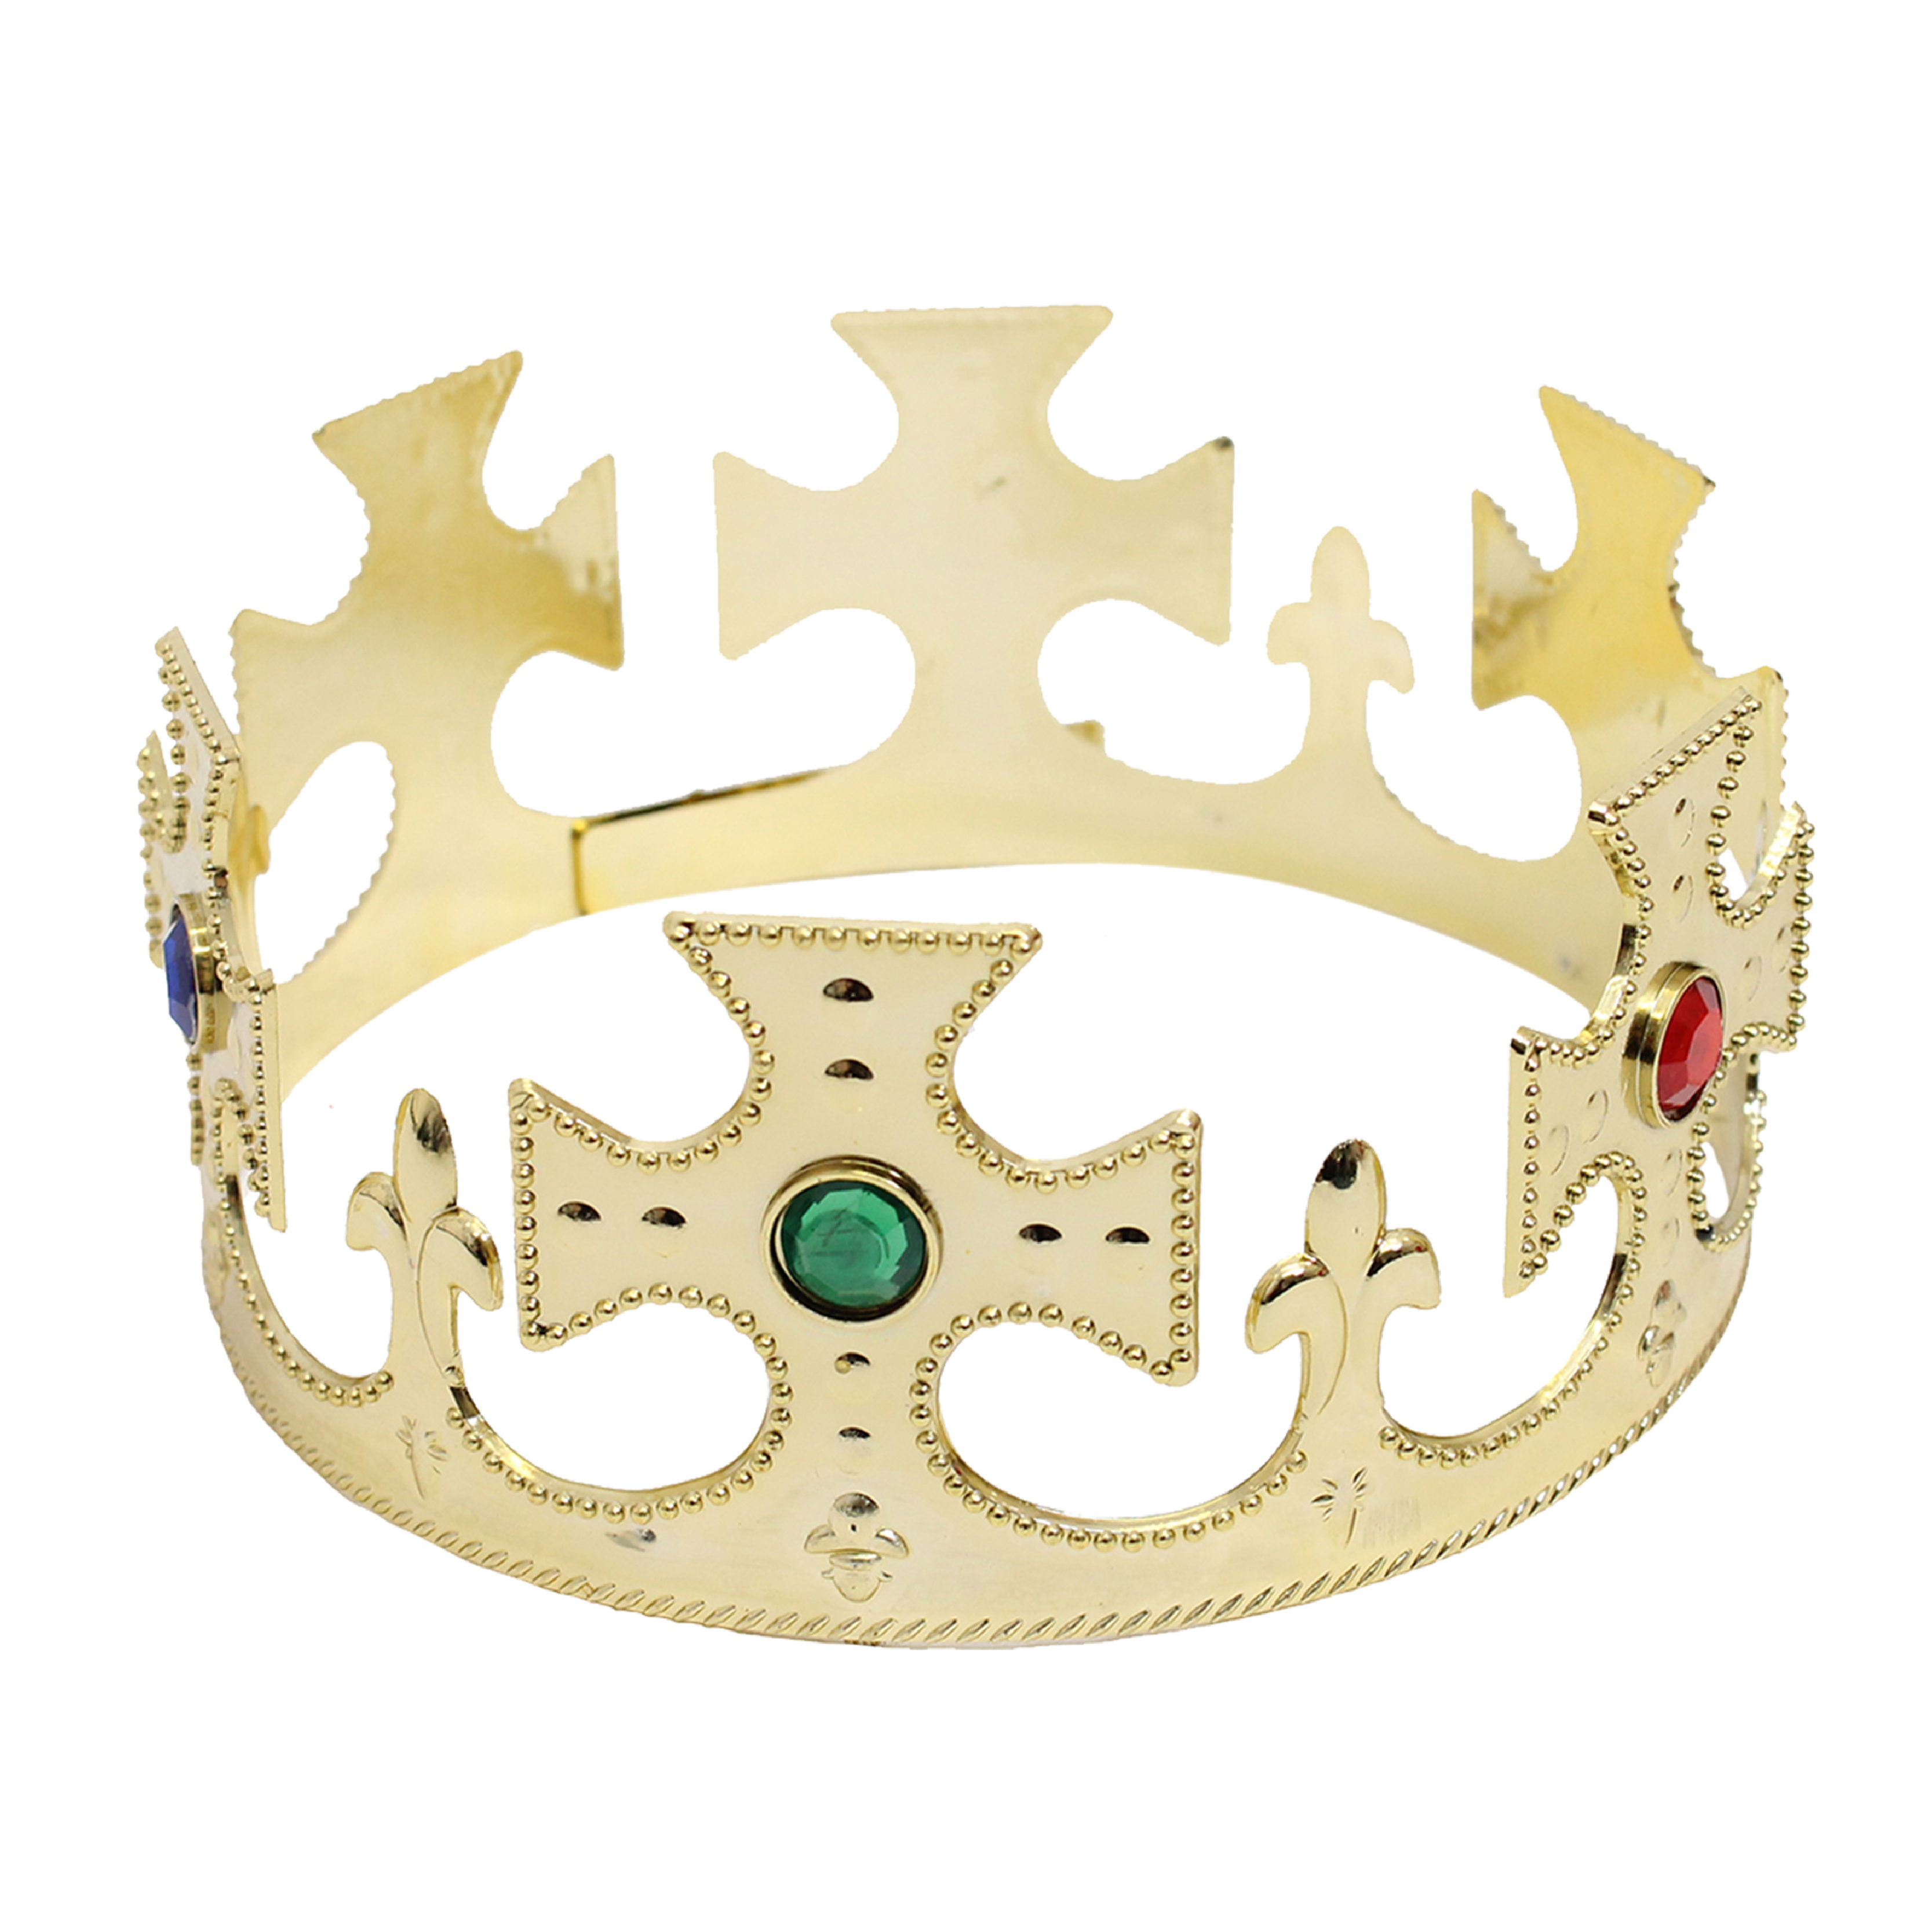 Gold Crown with Jewels - I Love Fancy Dress